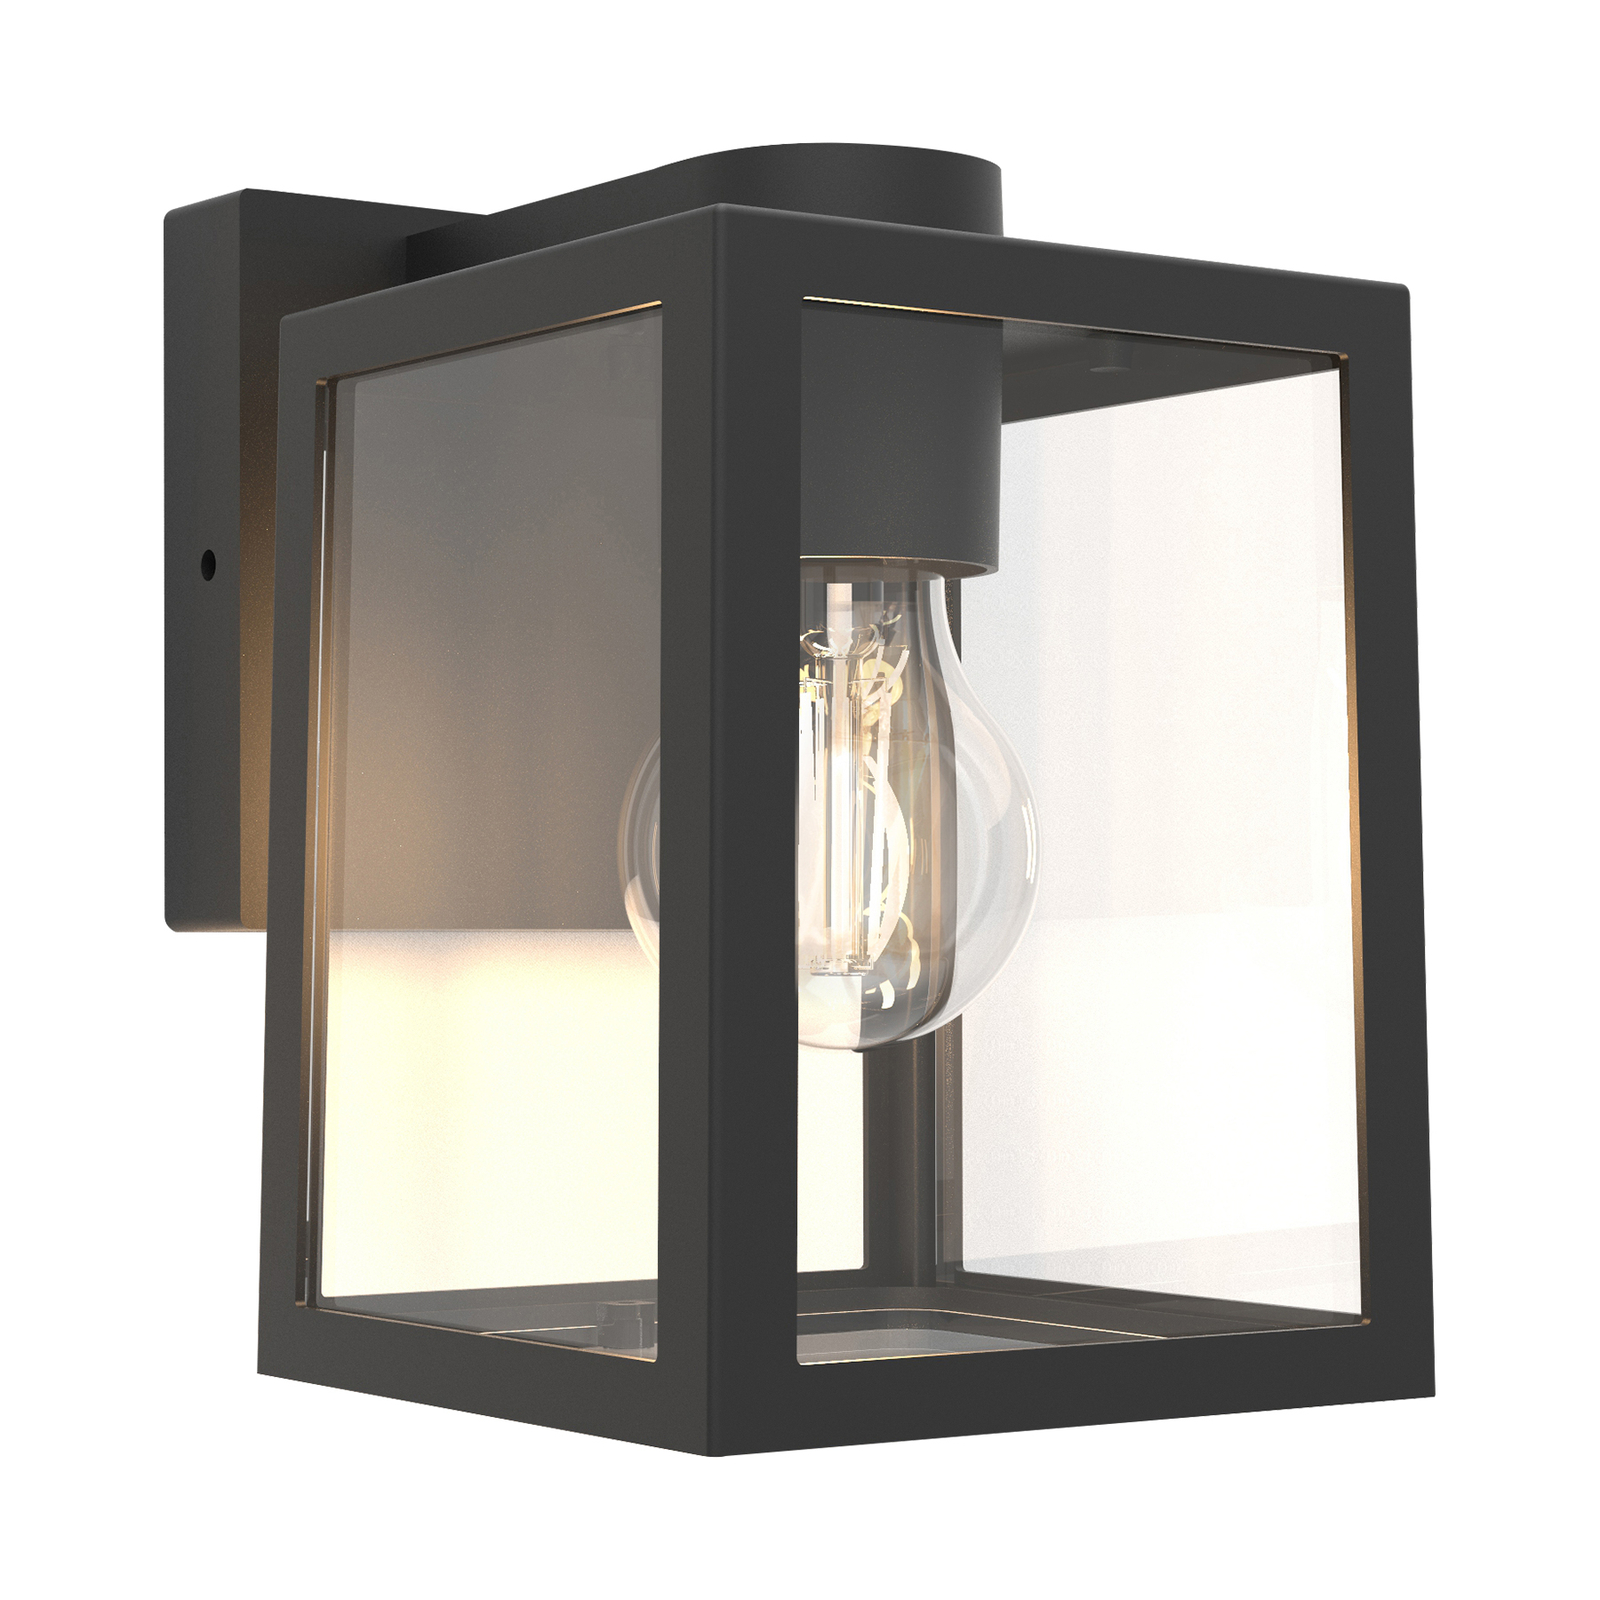 Shiva outdoor wall light lantern with clear glass